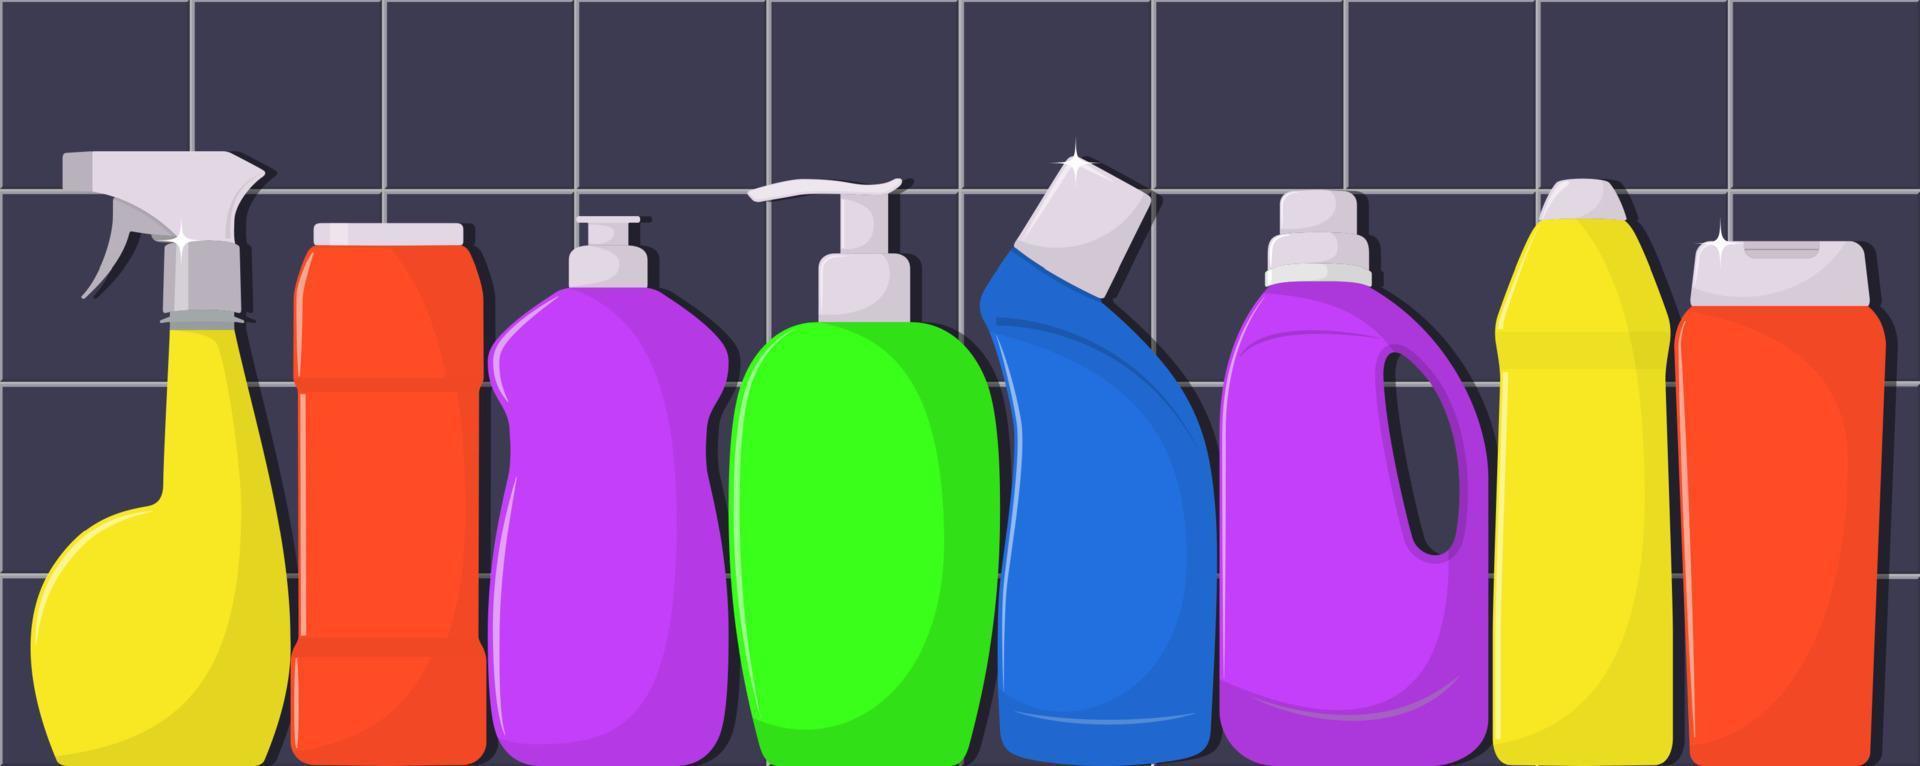 The bottles of detergent, washing powder, detergent powder, bottle of spray, a means for washing dishes. The bottles of detergent on tile background. Vector illustration in flat style.